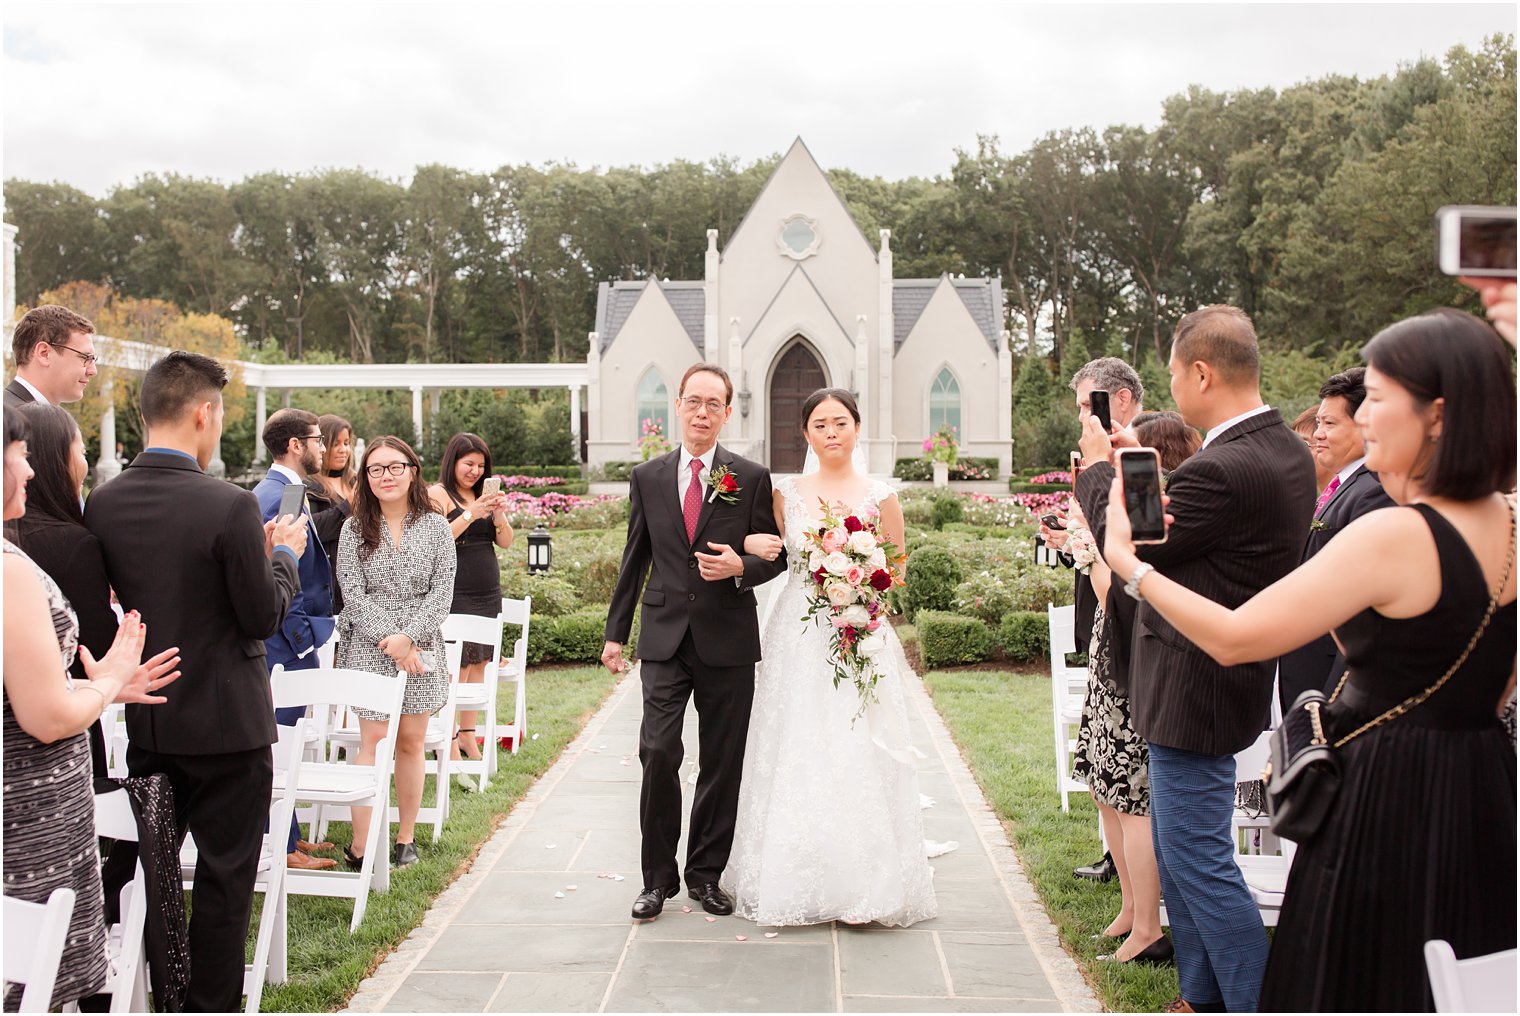 Outdoor wedding ceremony at Park Chateau Estate